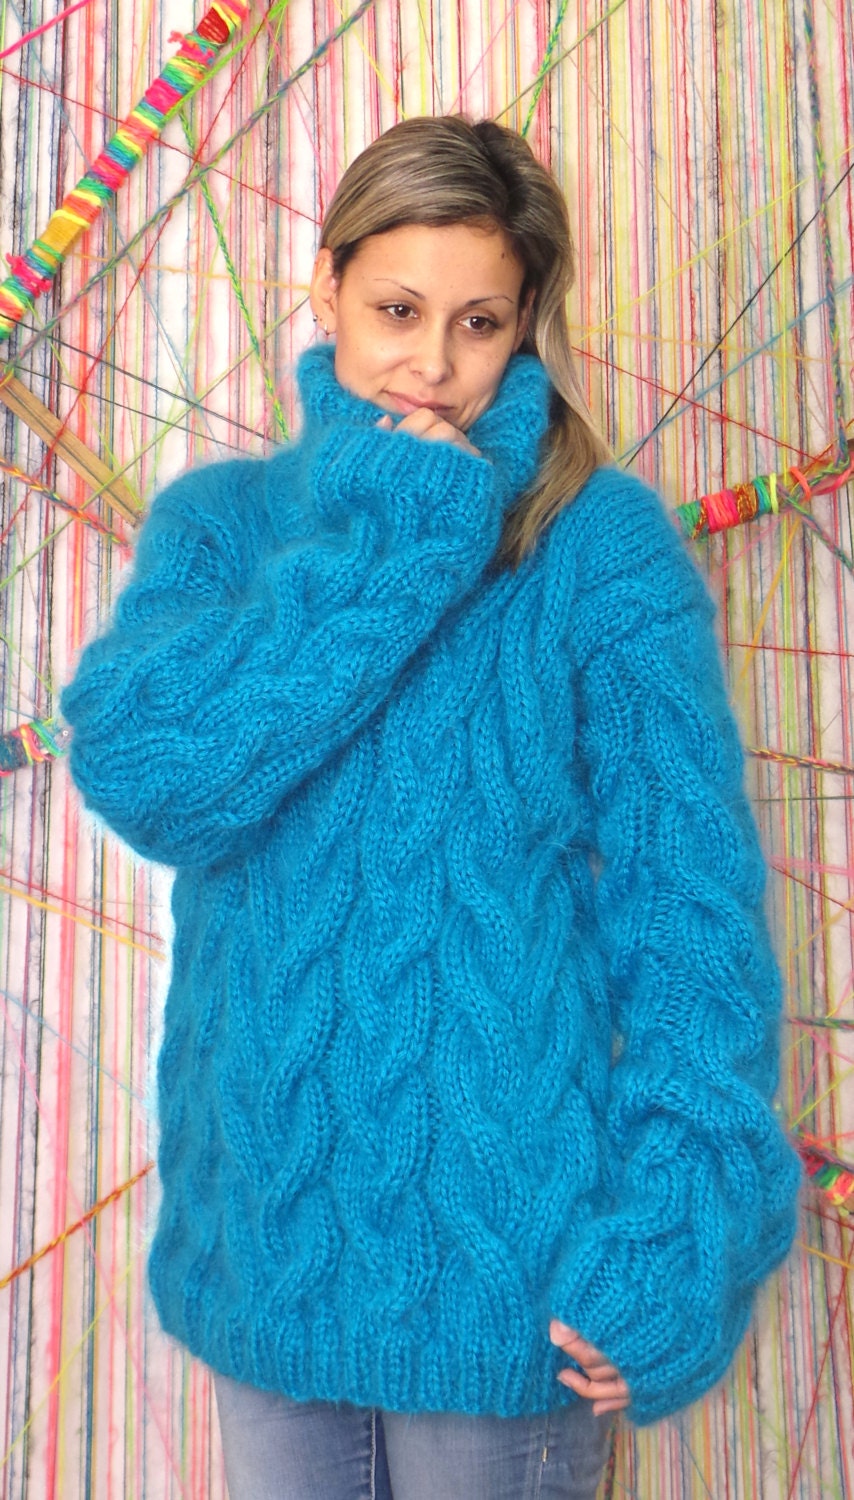 Hand Knit Mohair Sweater Cable Blue Fuzzy Turtleneck Jumper | Etsy